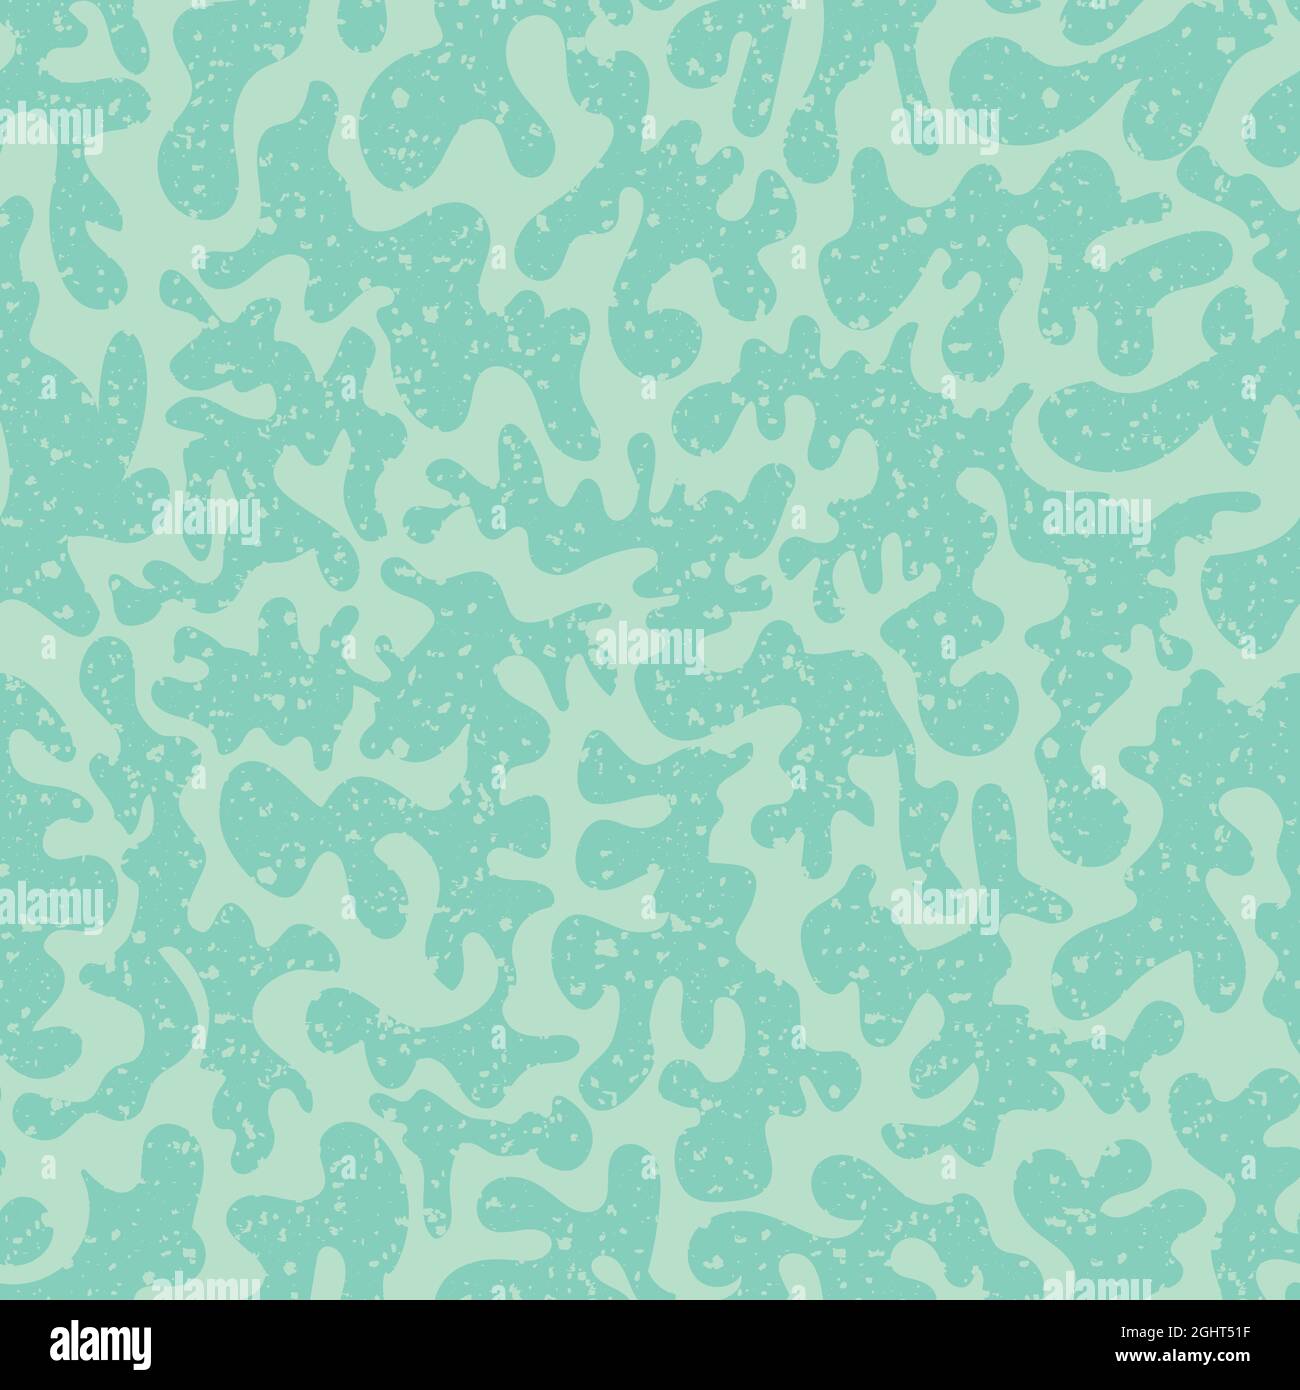 Vermicular vector seamless pattern background. Historical style backdrop in monochrome pastel teal blue with abstract coral shapes and terrazzo blend Stock Vector